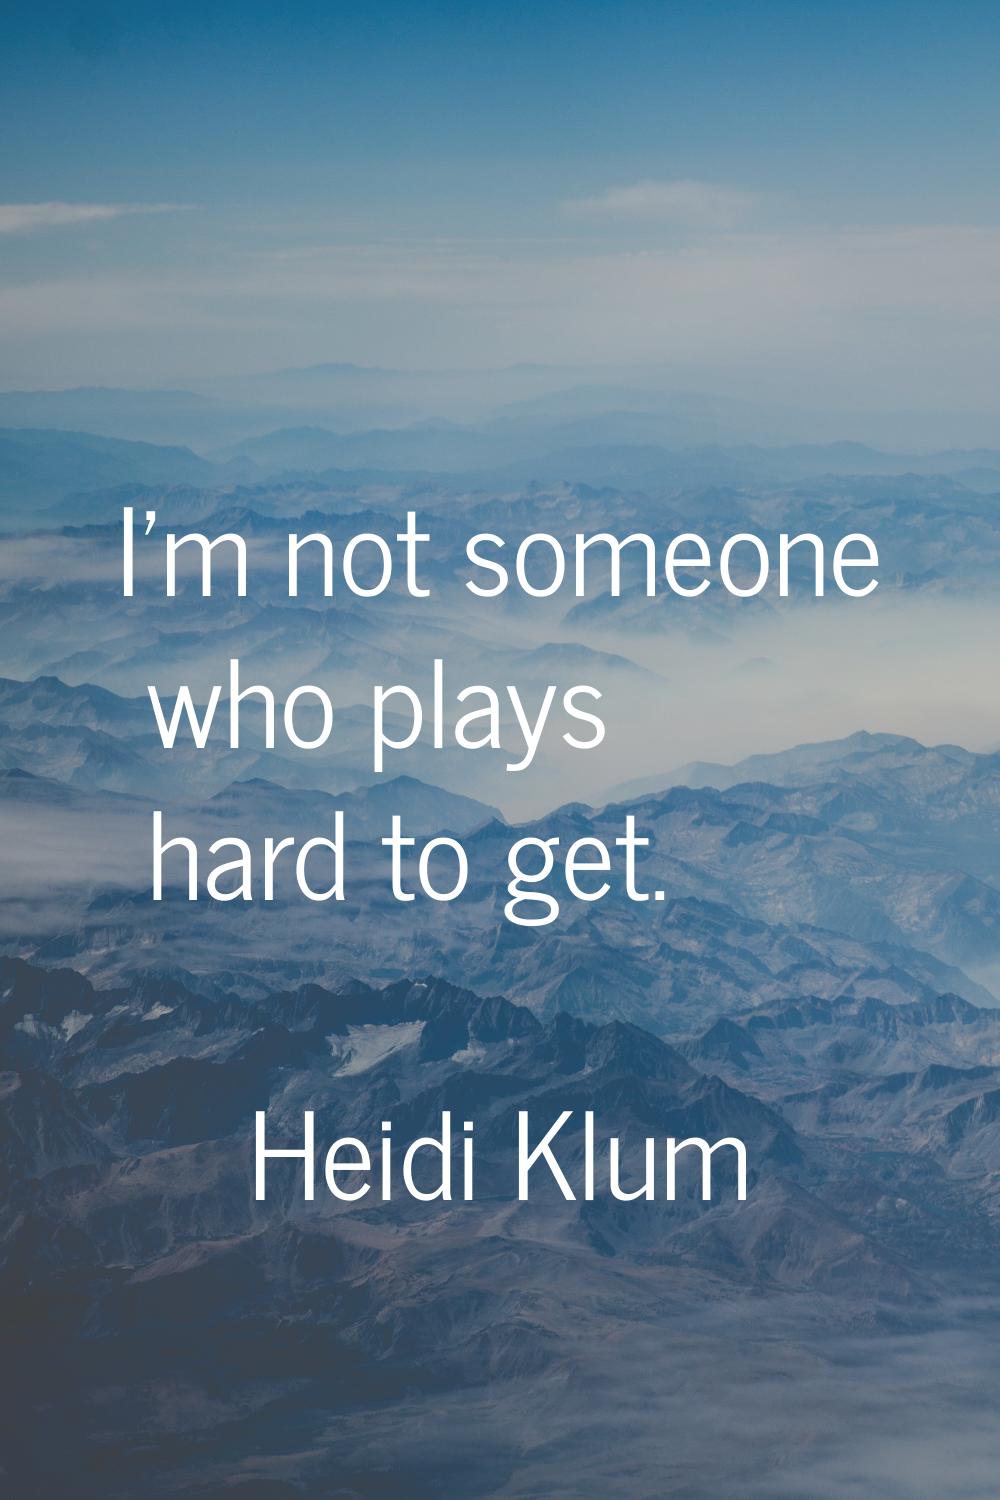 I'm not someone who plays hard to get.